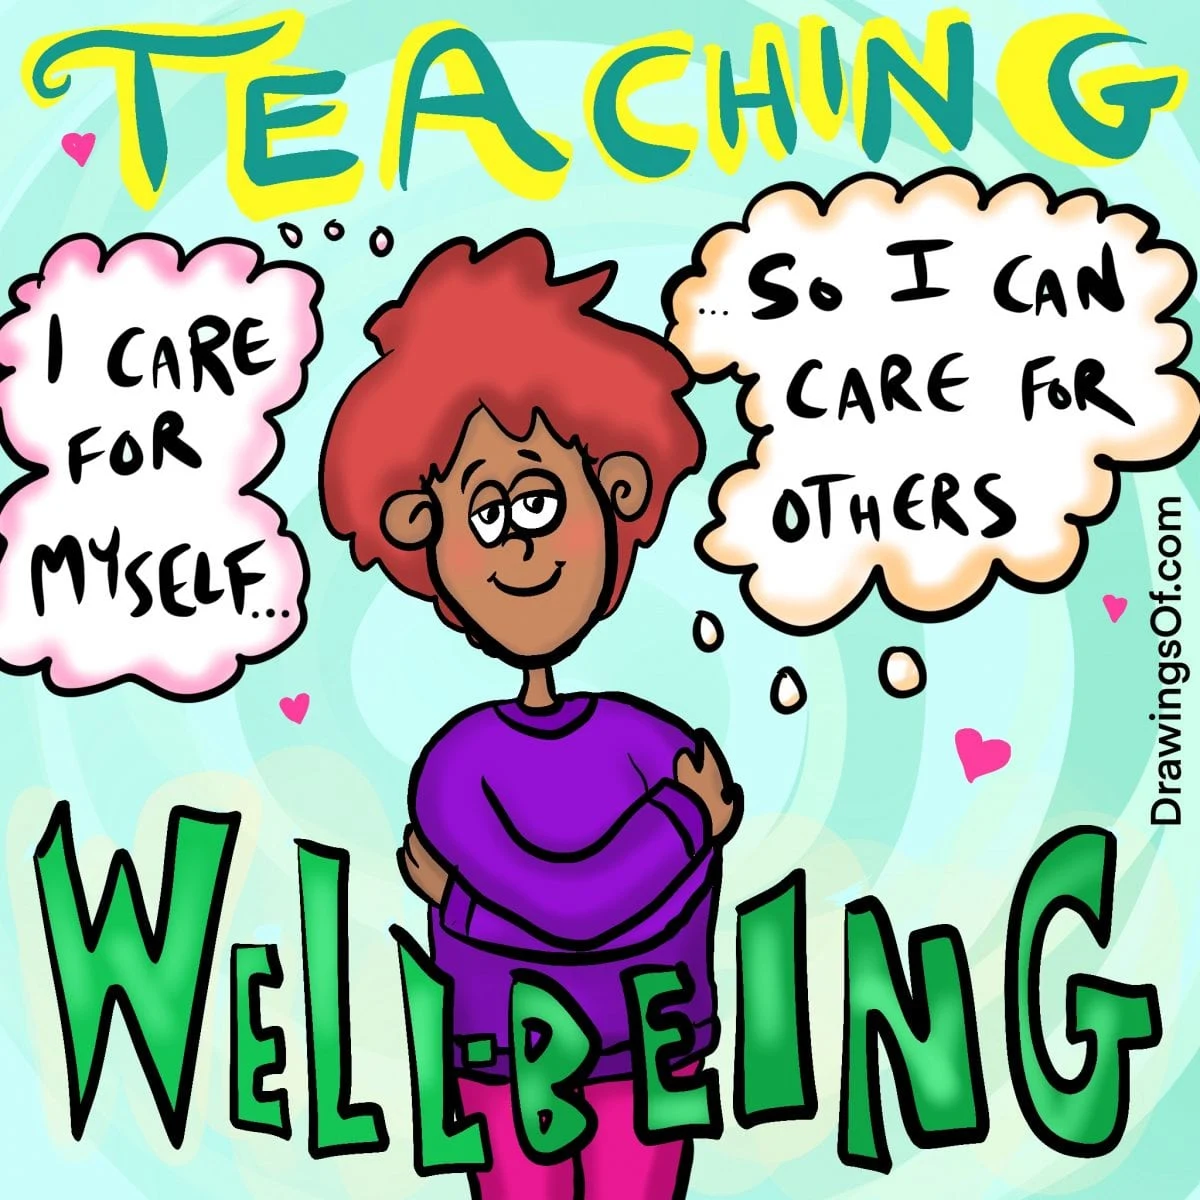 Teaching self-care and respect.